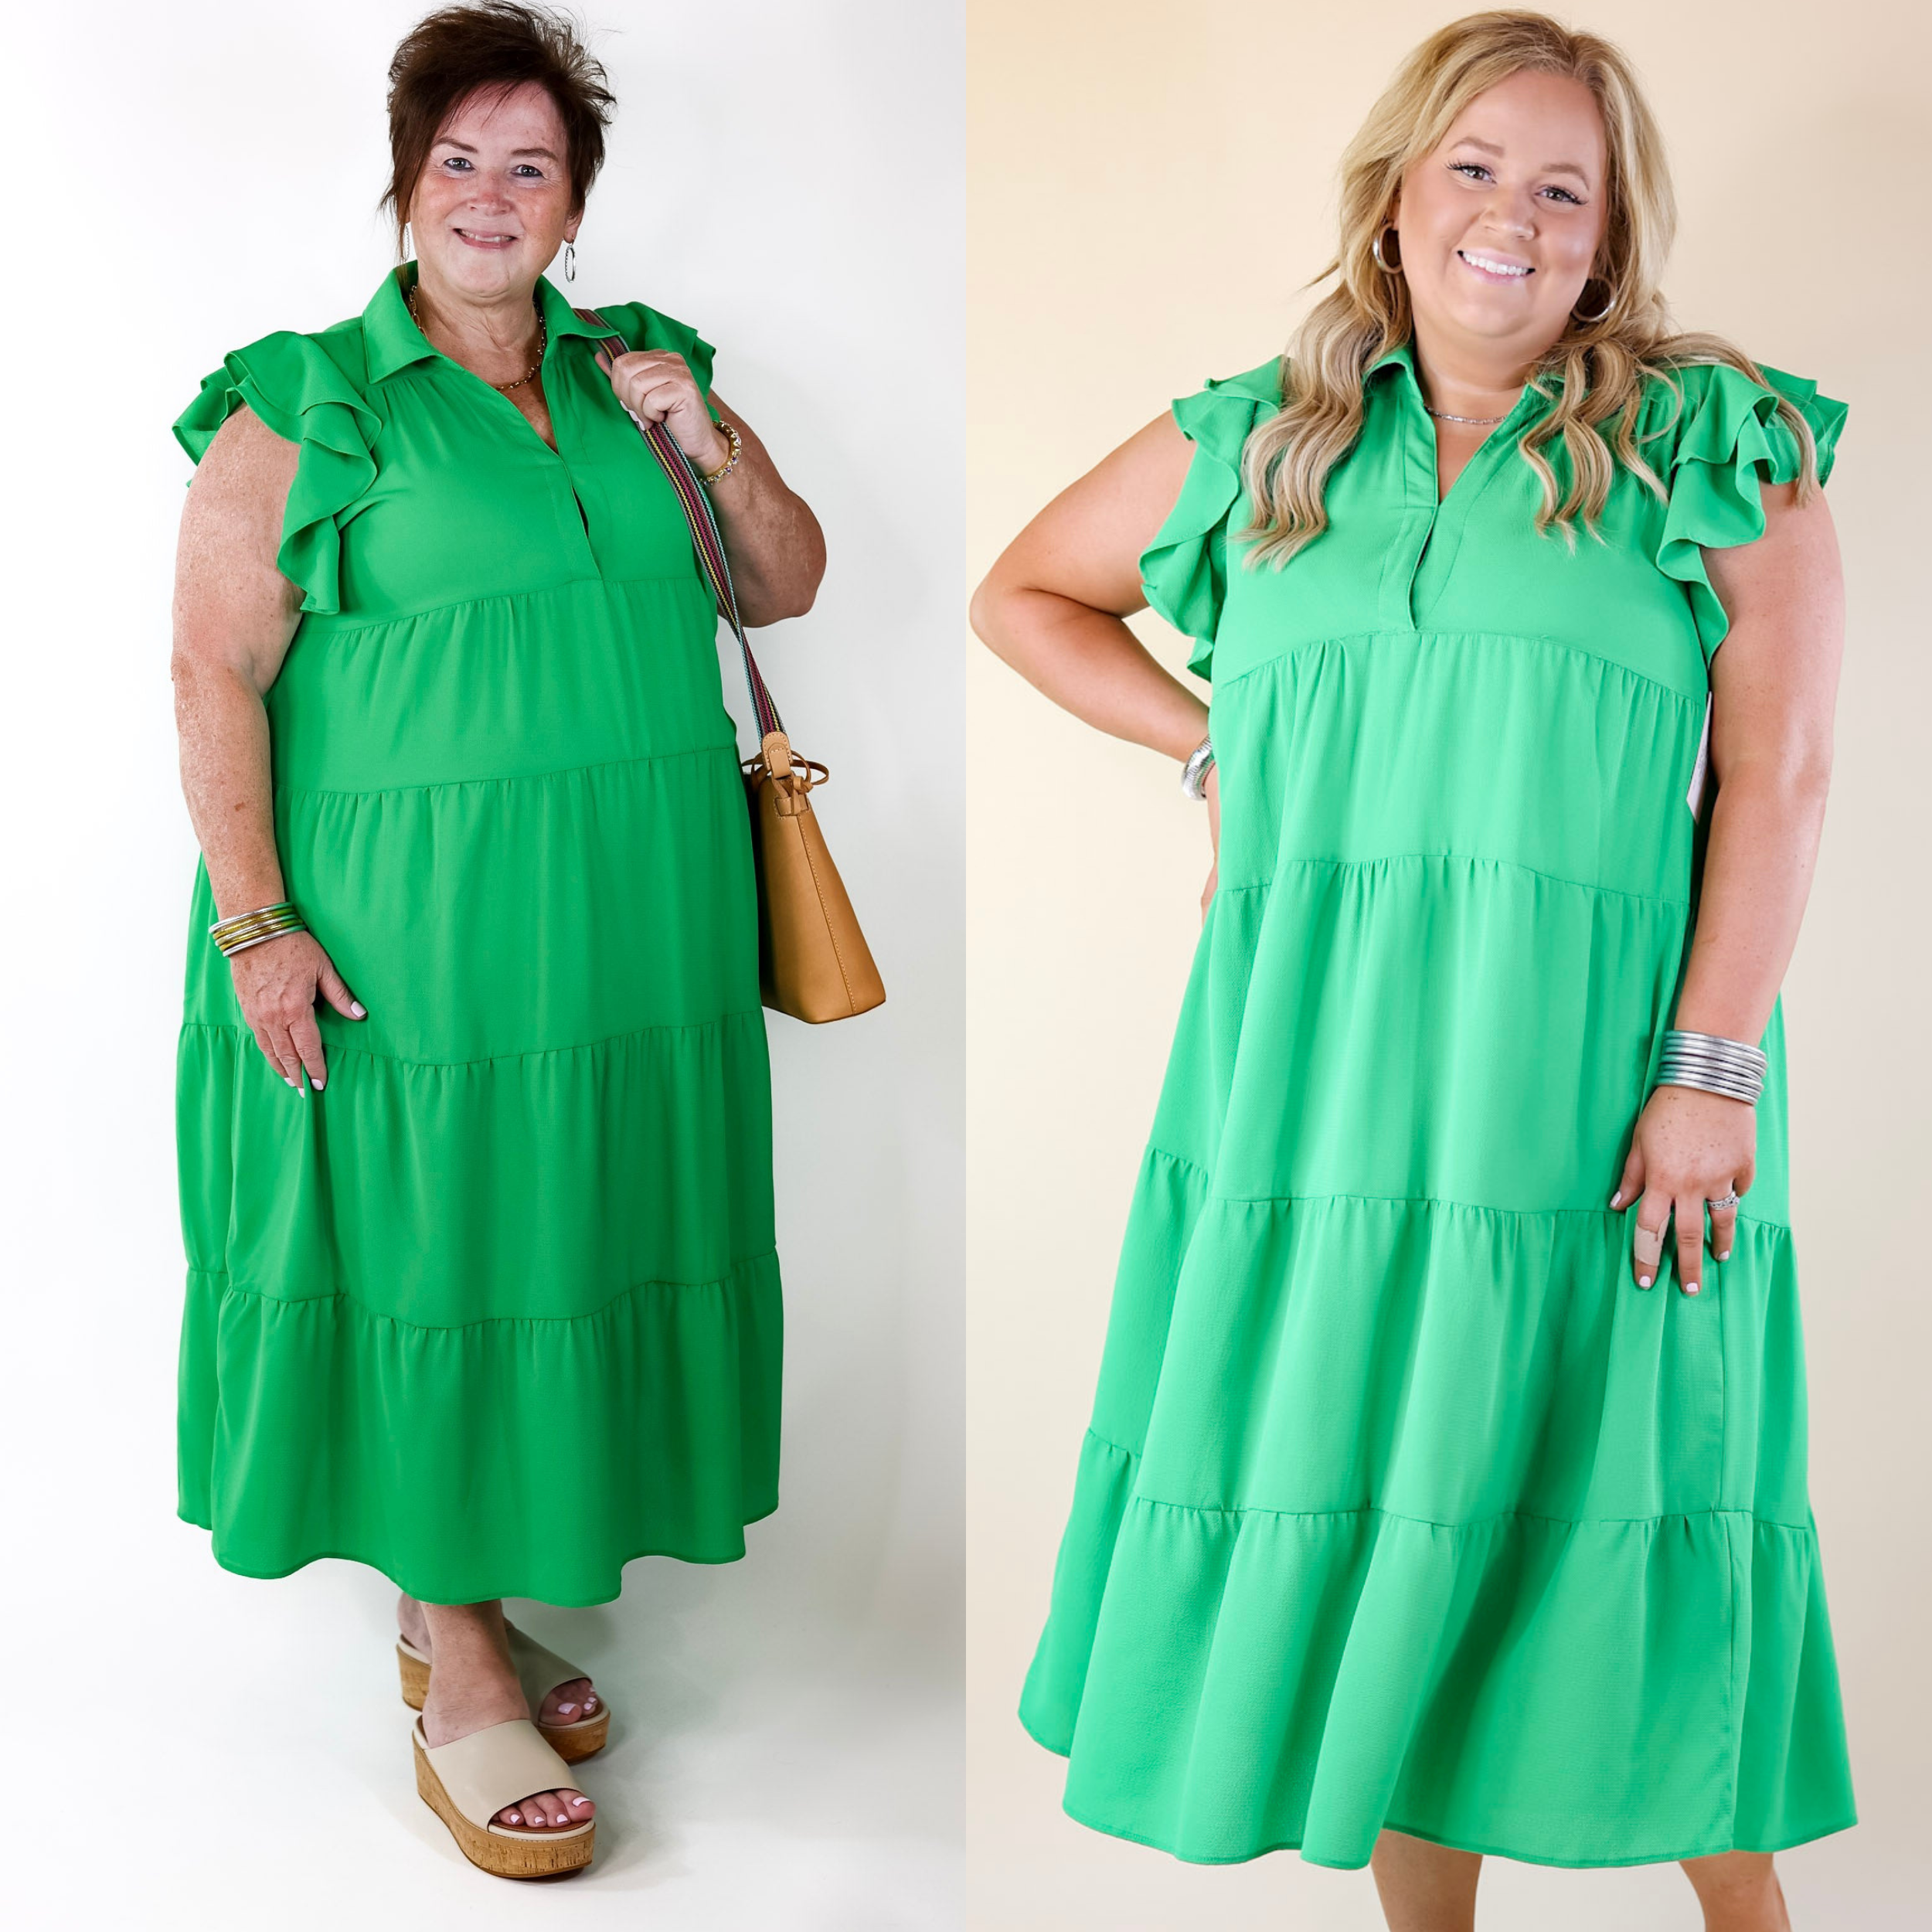 All Of A Sudden Tiered Midi Dress with Ruffle Cap Sleeves in Green - Giddy Up Glamour Boutique